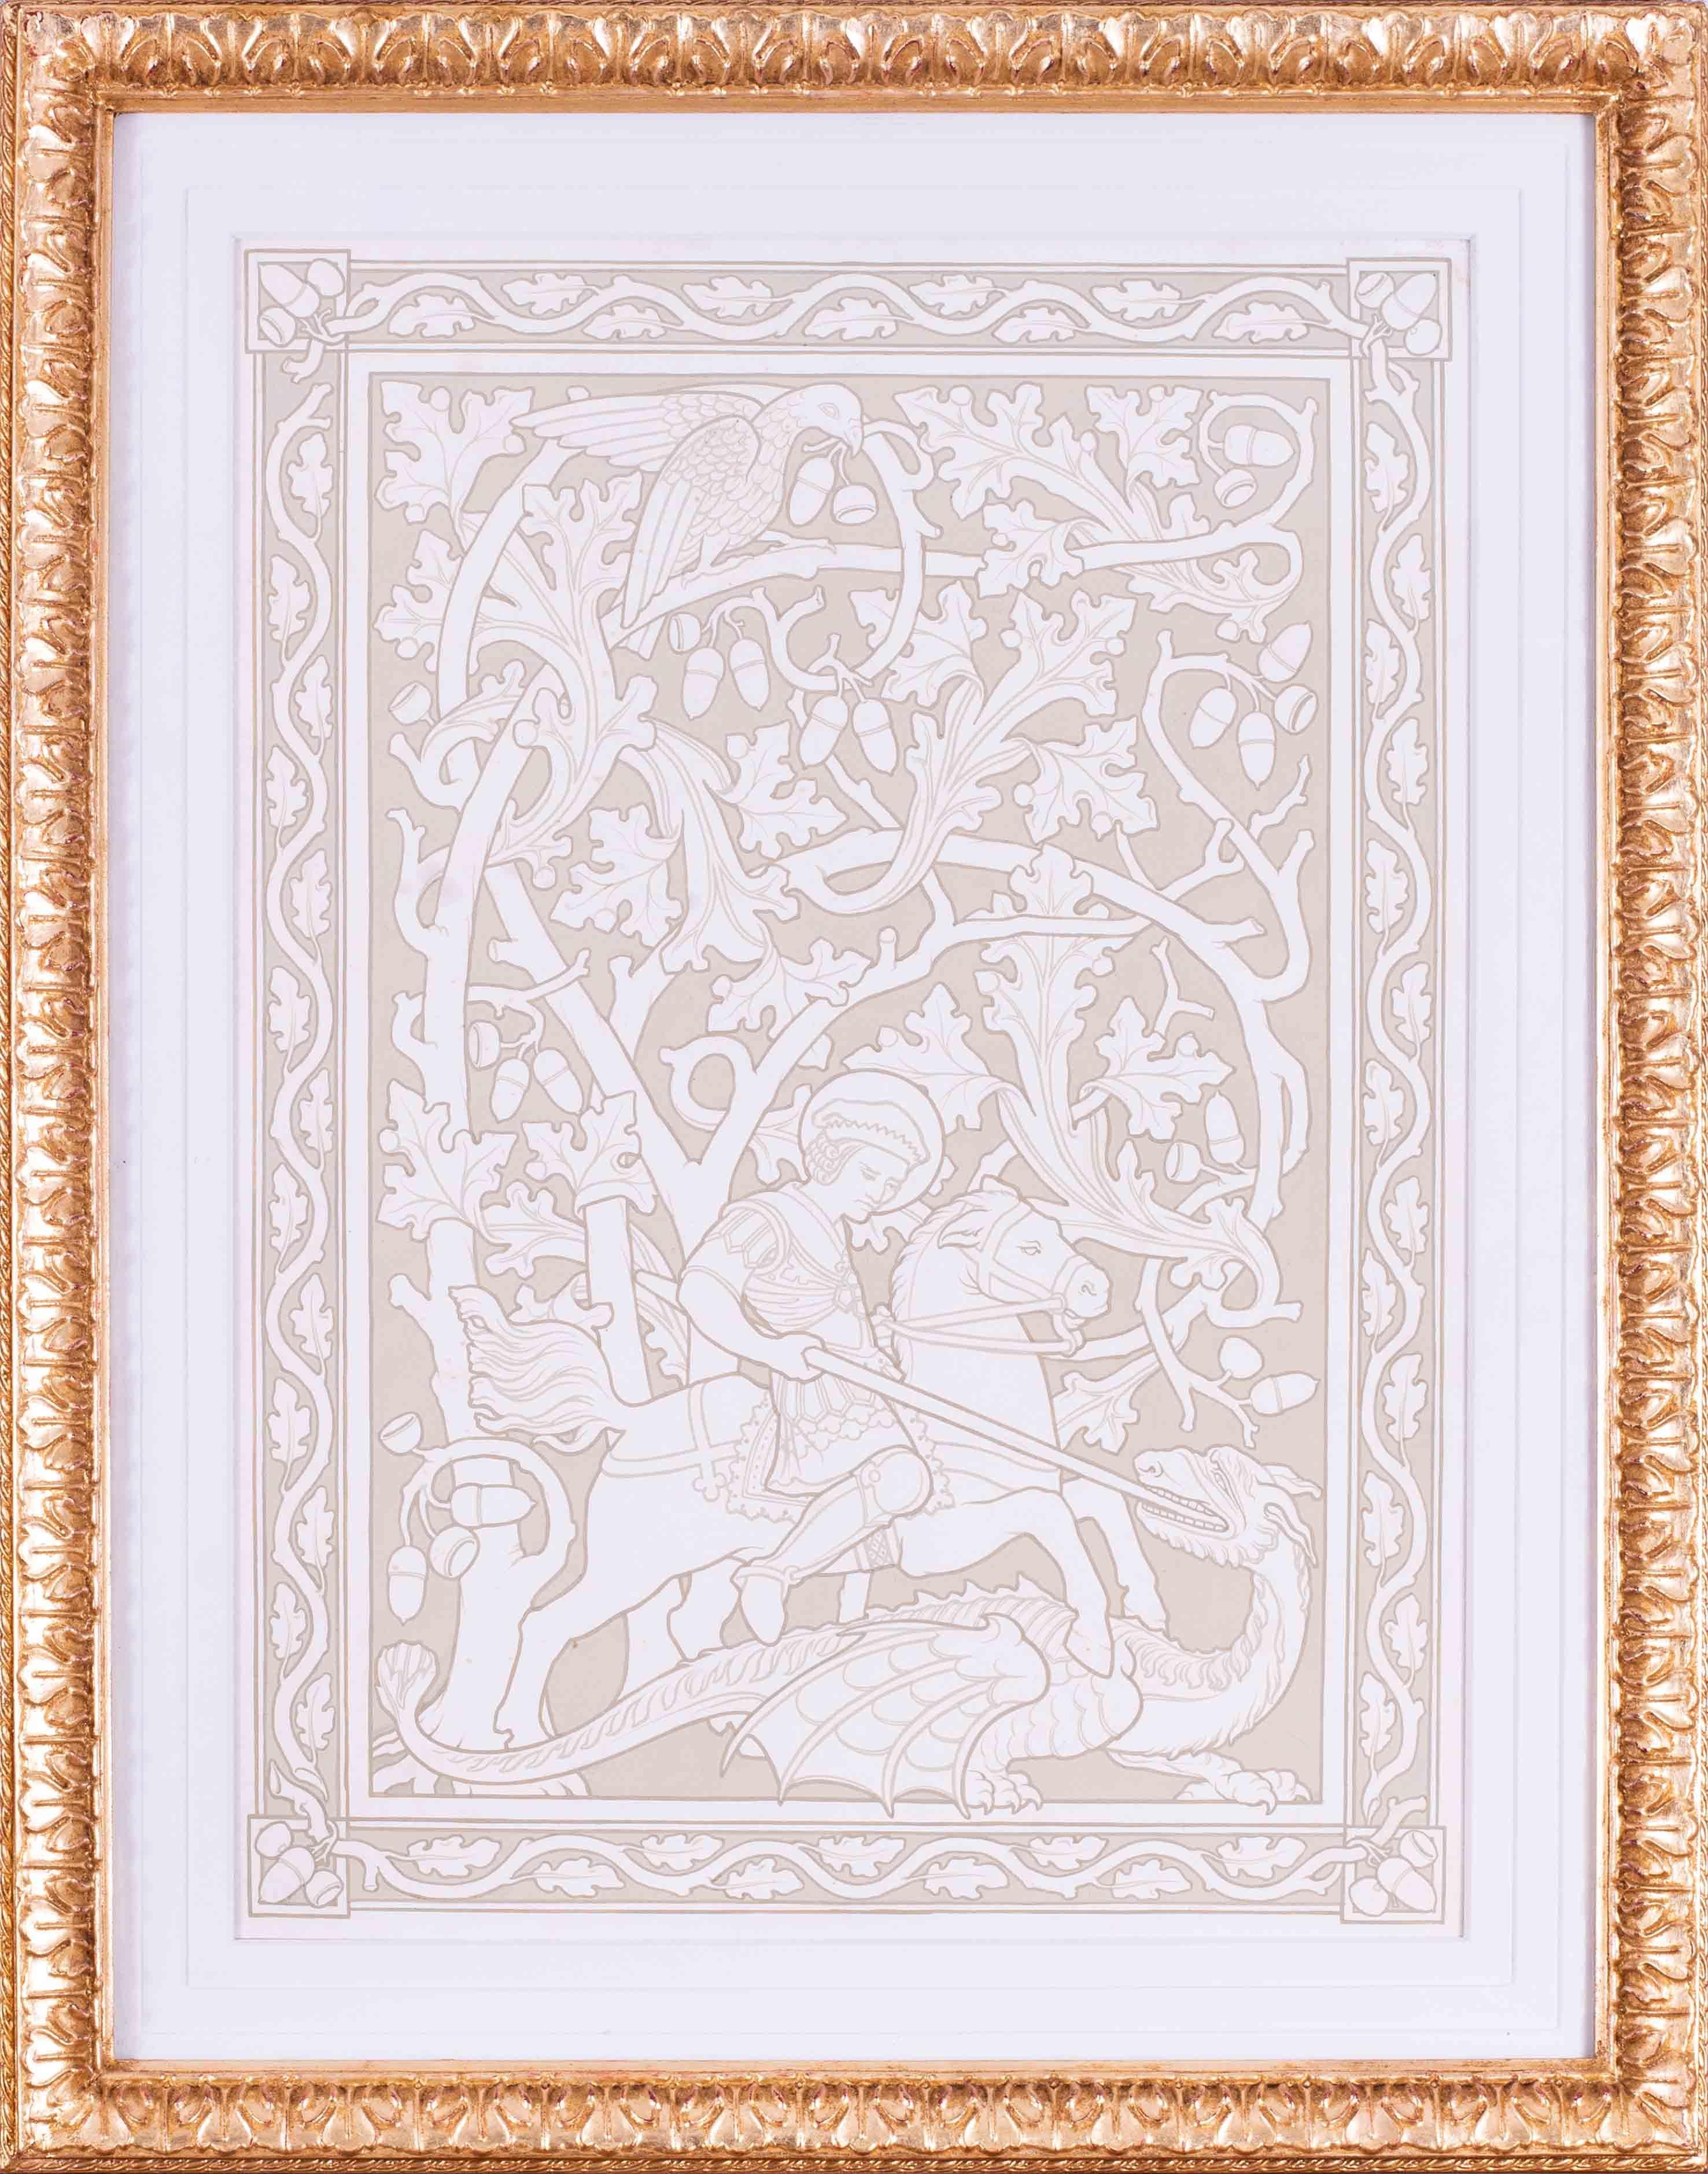 British, early 20th Century design of George and the Dragon by Edward Ridley